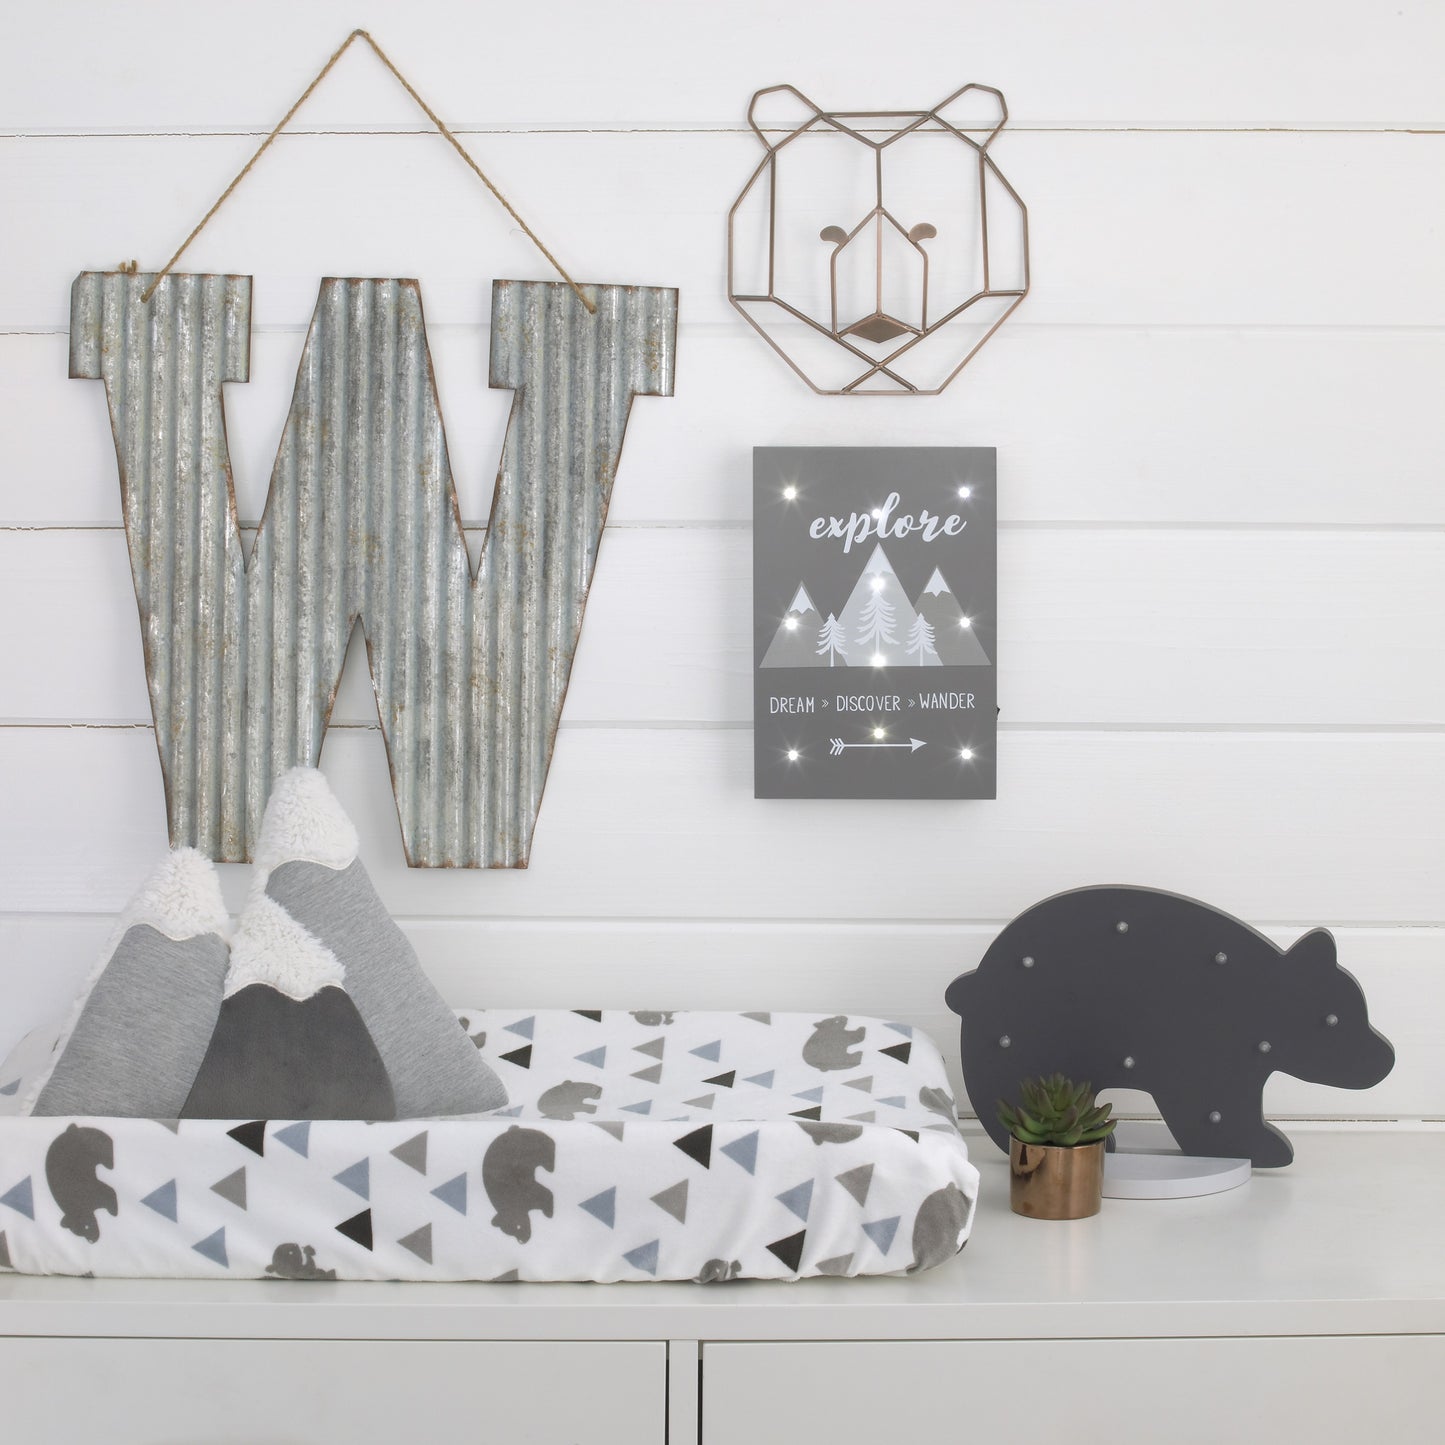 Little Love by NoJo Grey, White, Charcoal Mountains "Explore, Dream, Discover, Wander" Lighted Wall Décor